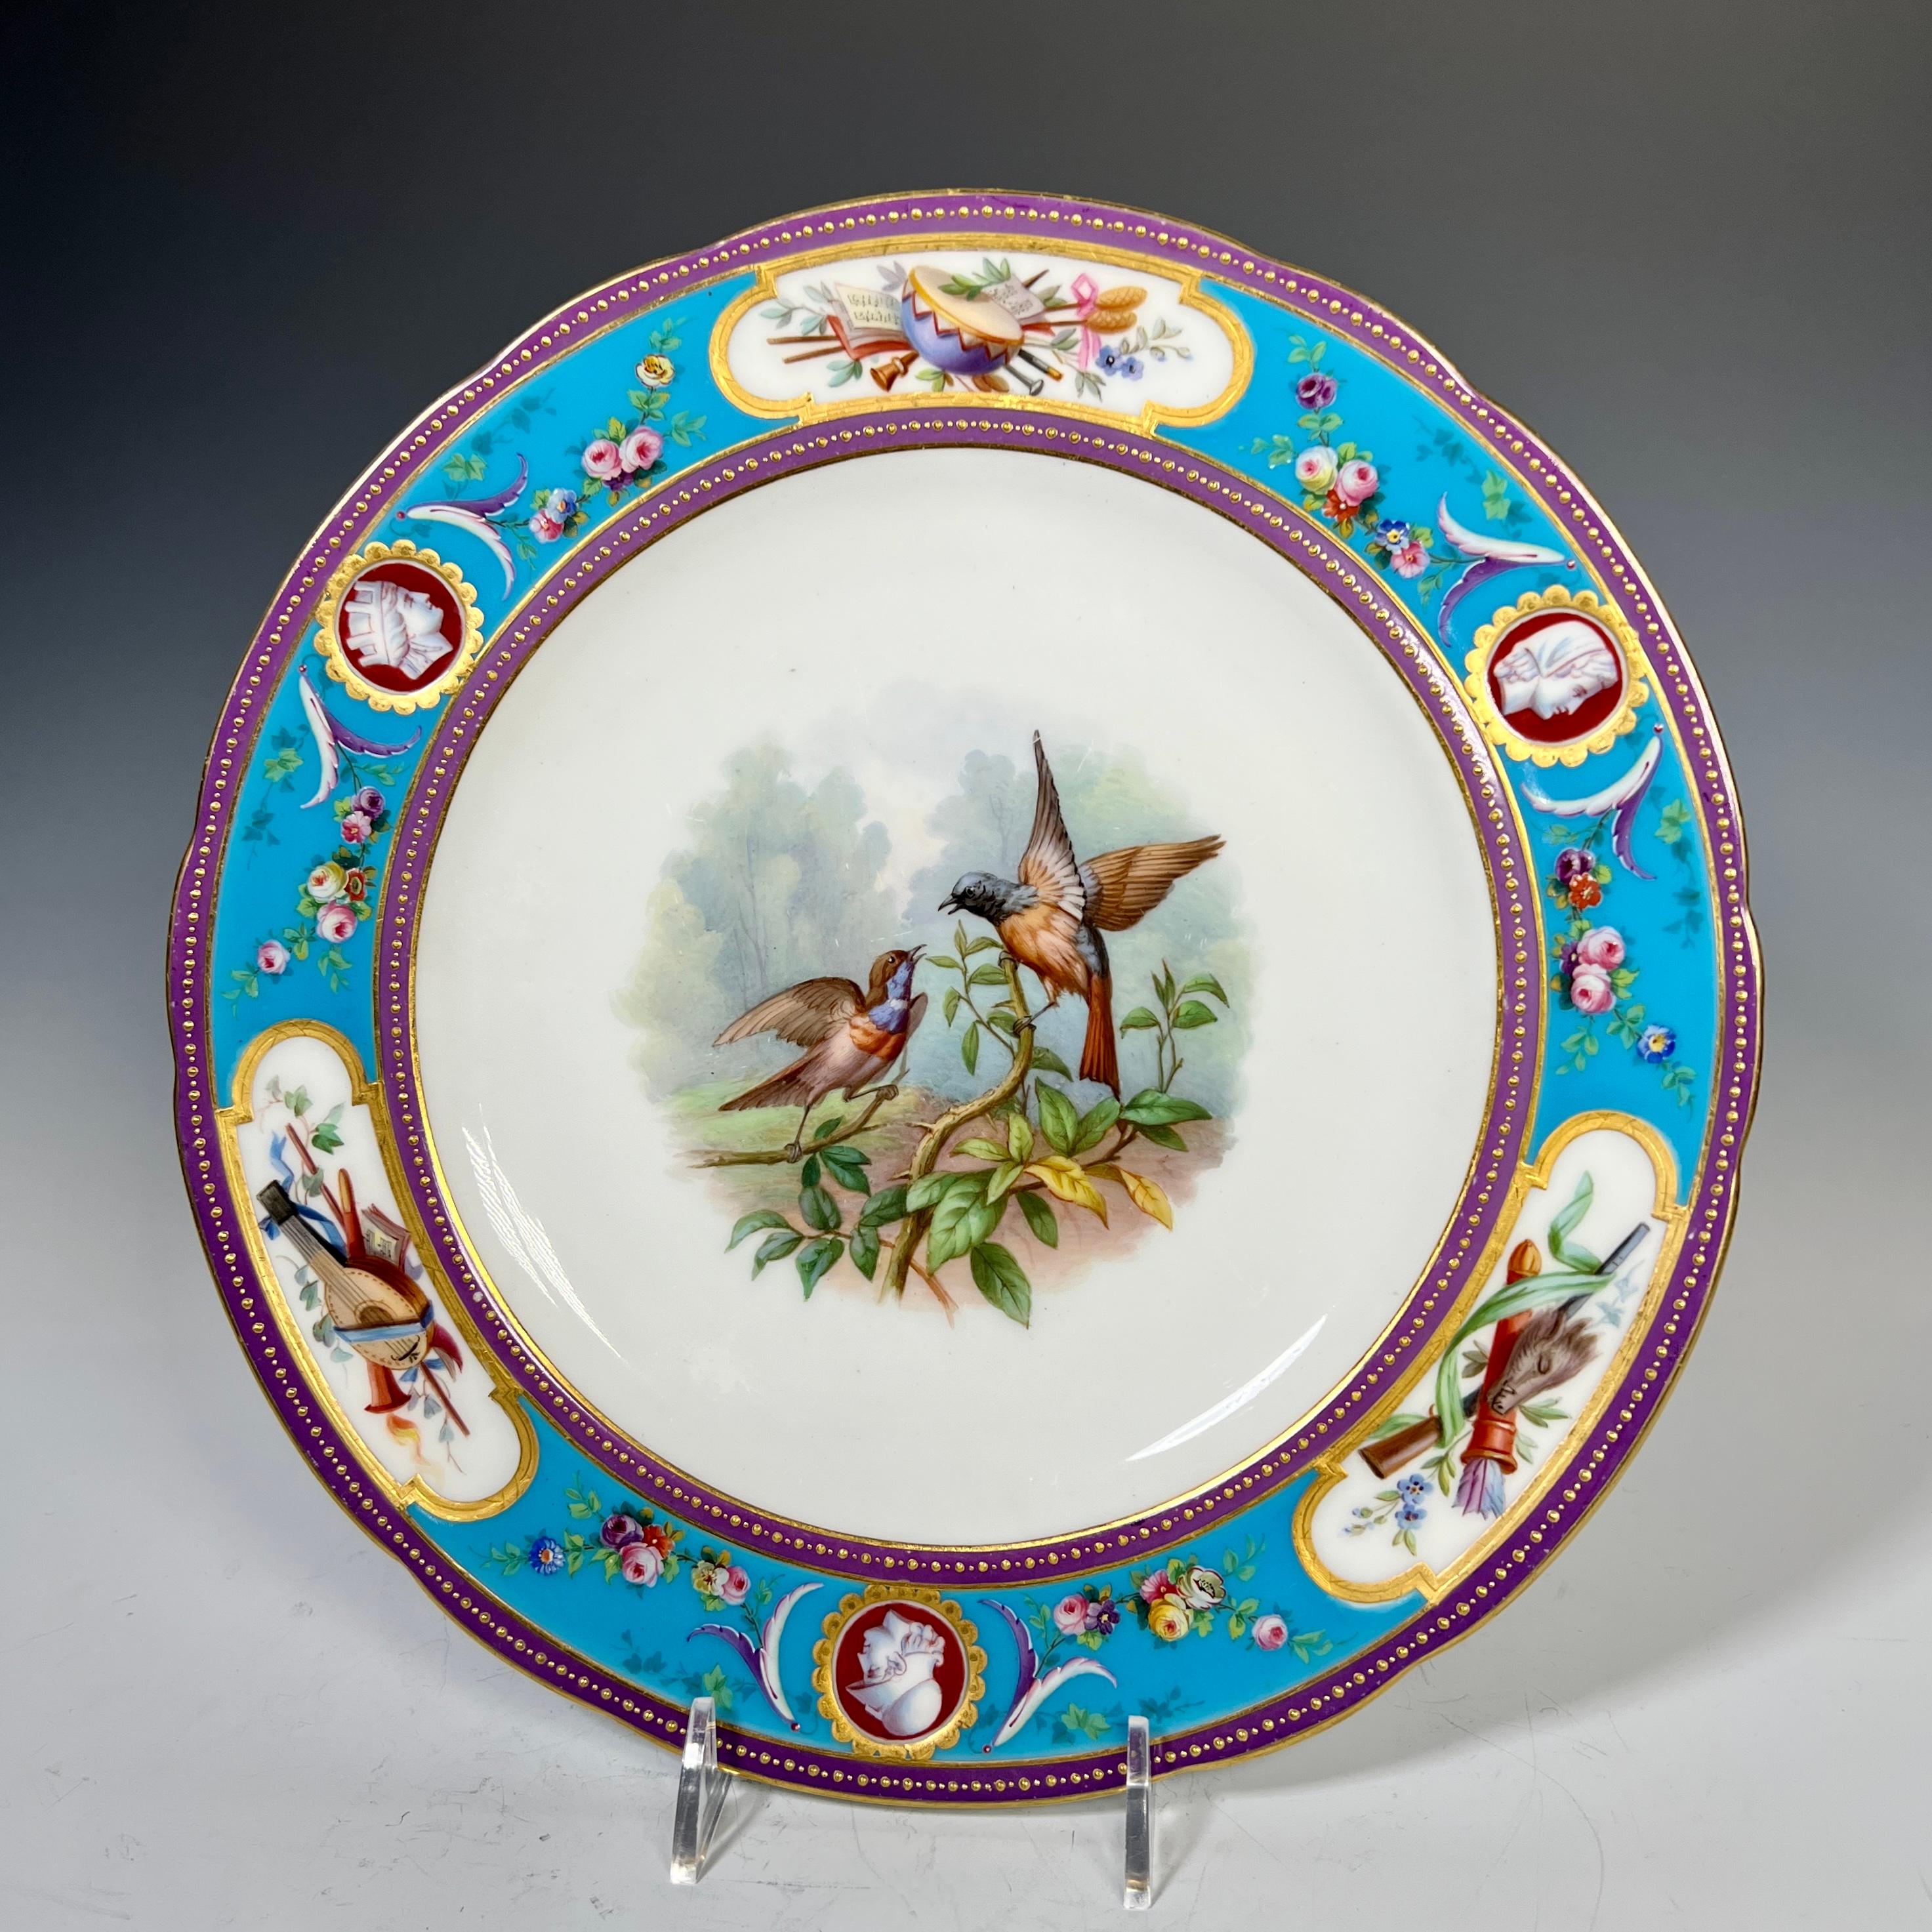 A rare and exceptional 19th century Minton dessert service featuring hand painted ornithological subjects hand painted in the neoclassical period consisting of 10 dessert plates and 2 footed compotes. The centers depict different bird subjects, each